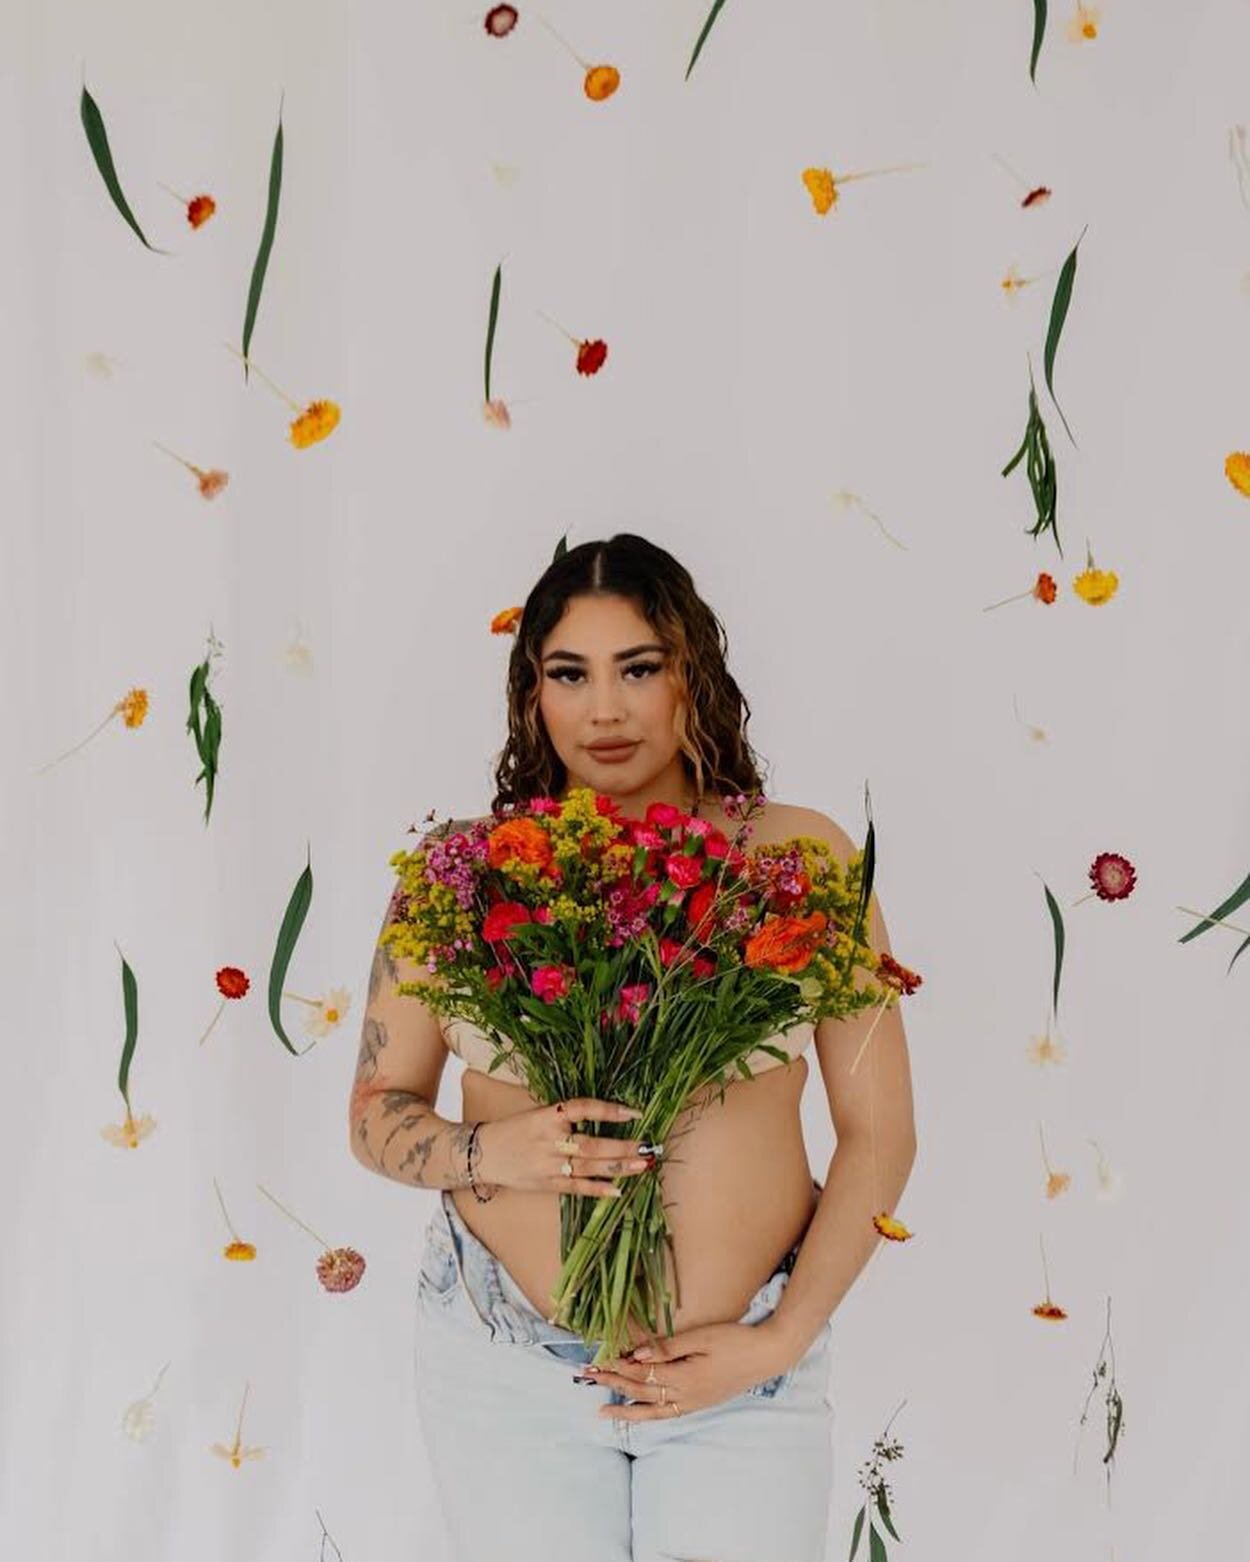 This flower top maternity session is perfect with our hanging flowers and blue wall @rosiesierra.photography 🤩